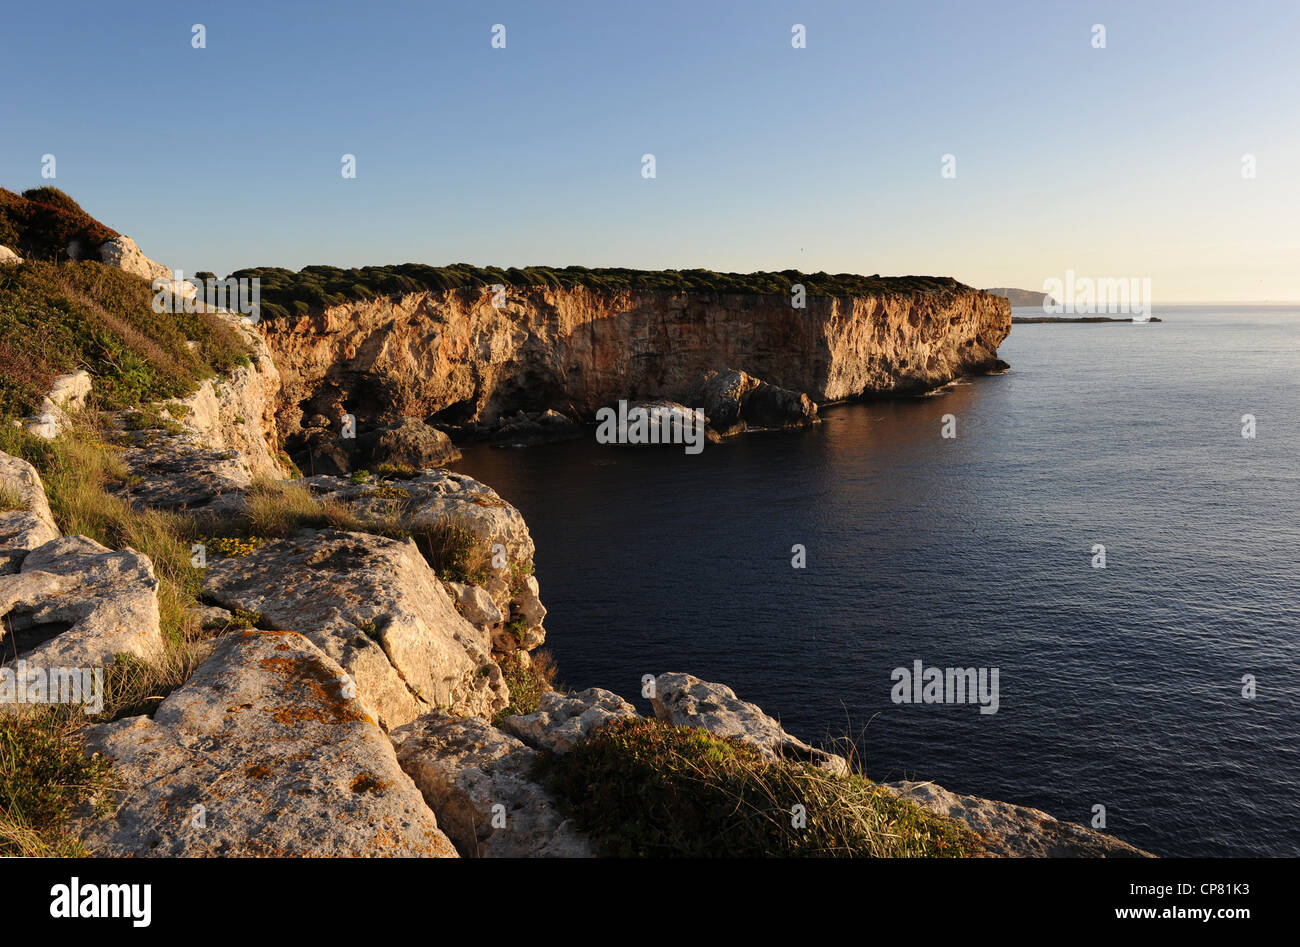 Menorca, Spain, cliffs of Rafalet looking towards entrance to Mahon Harbour in the distance. Photograph taken at sunrise with a very smooth sea Stock Photo